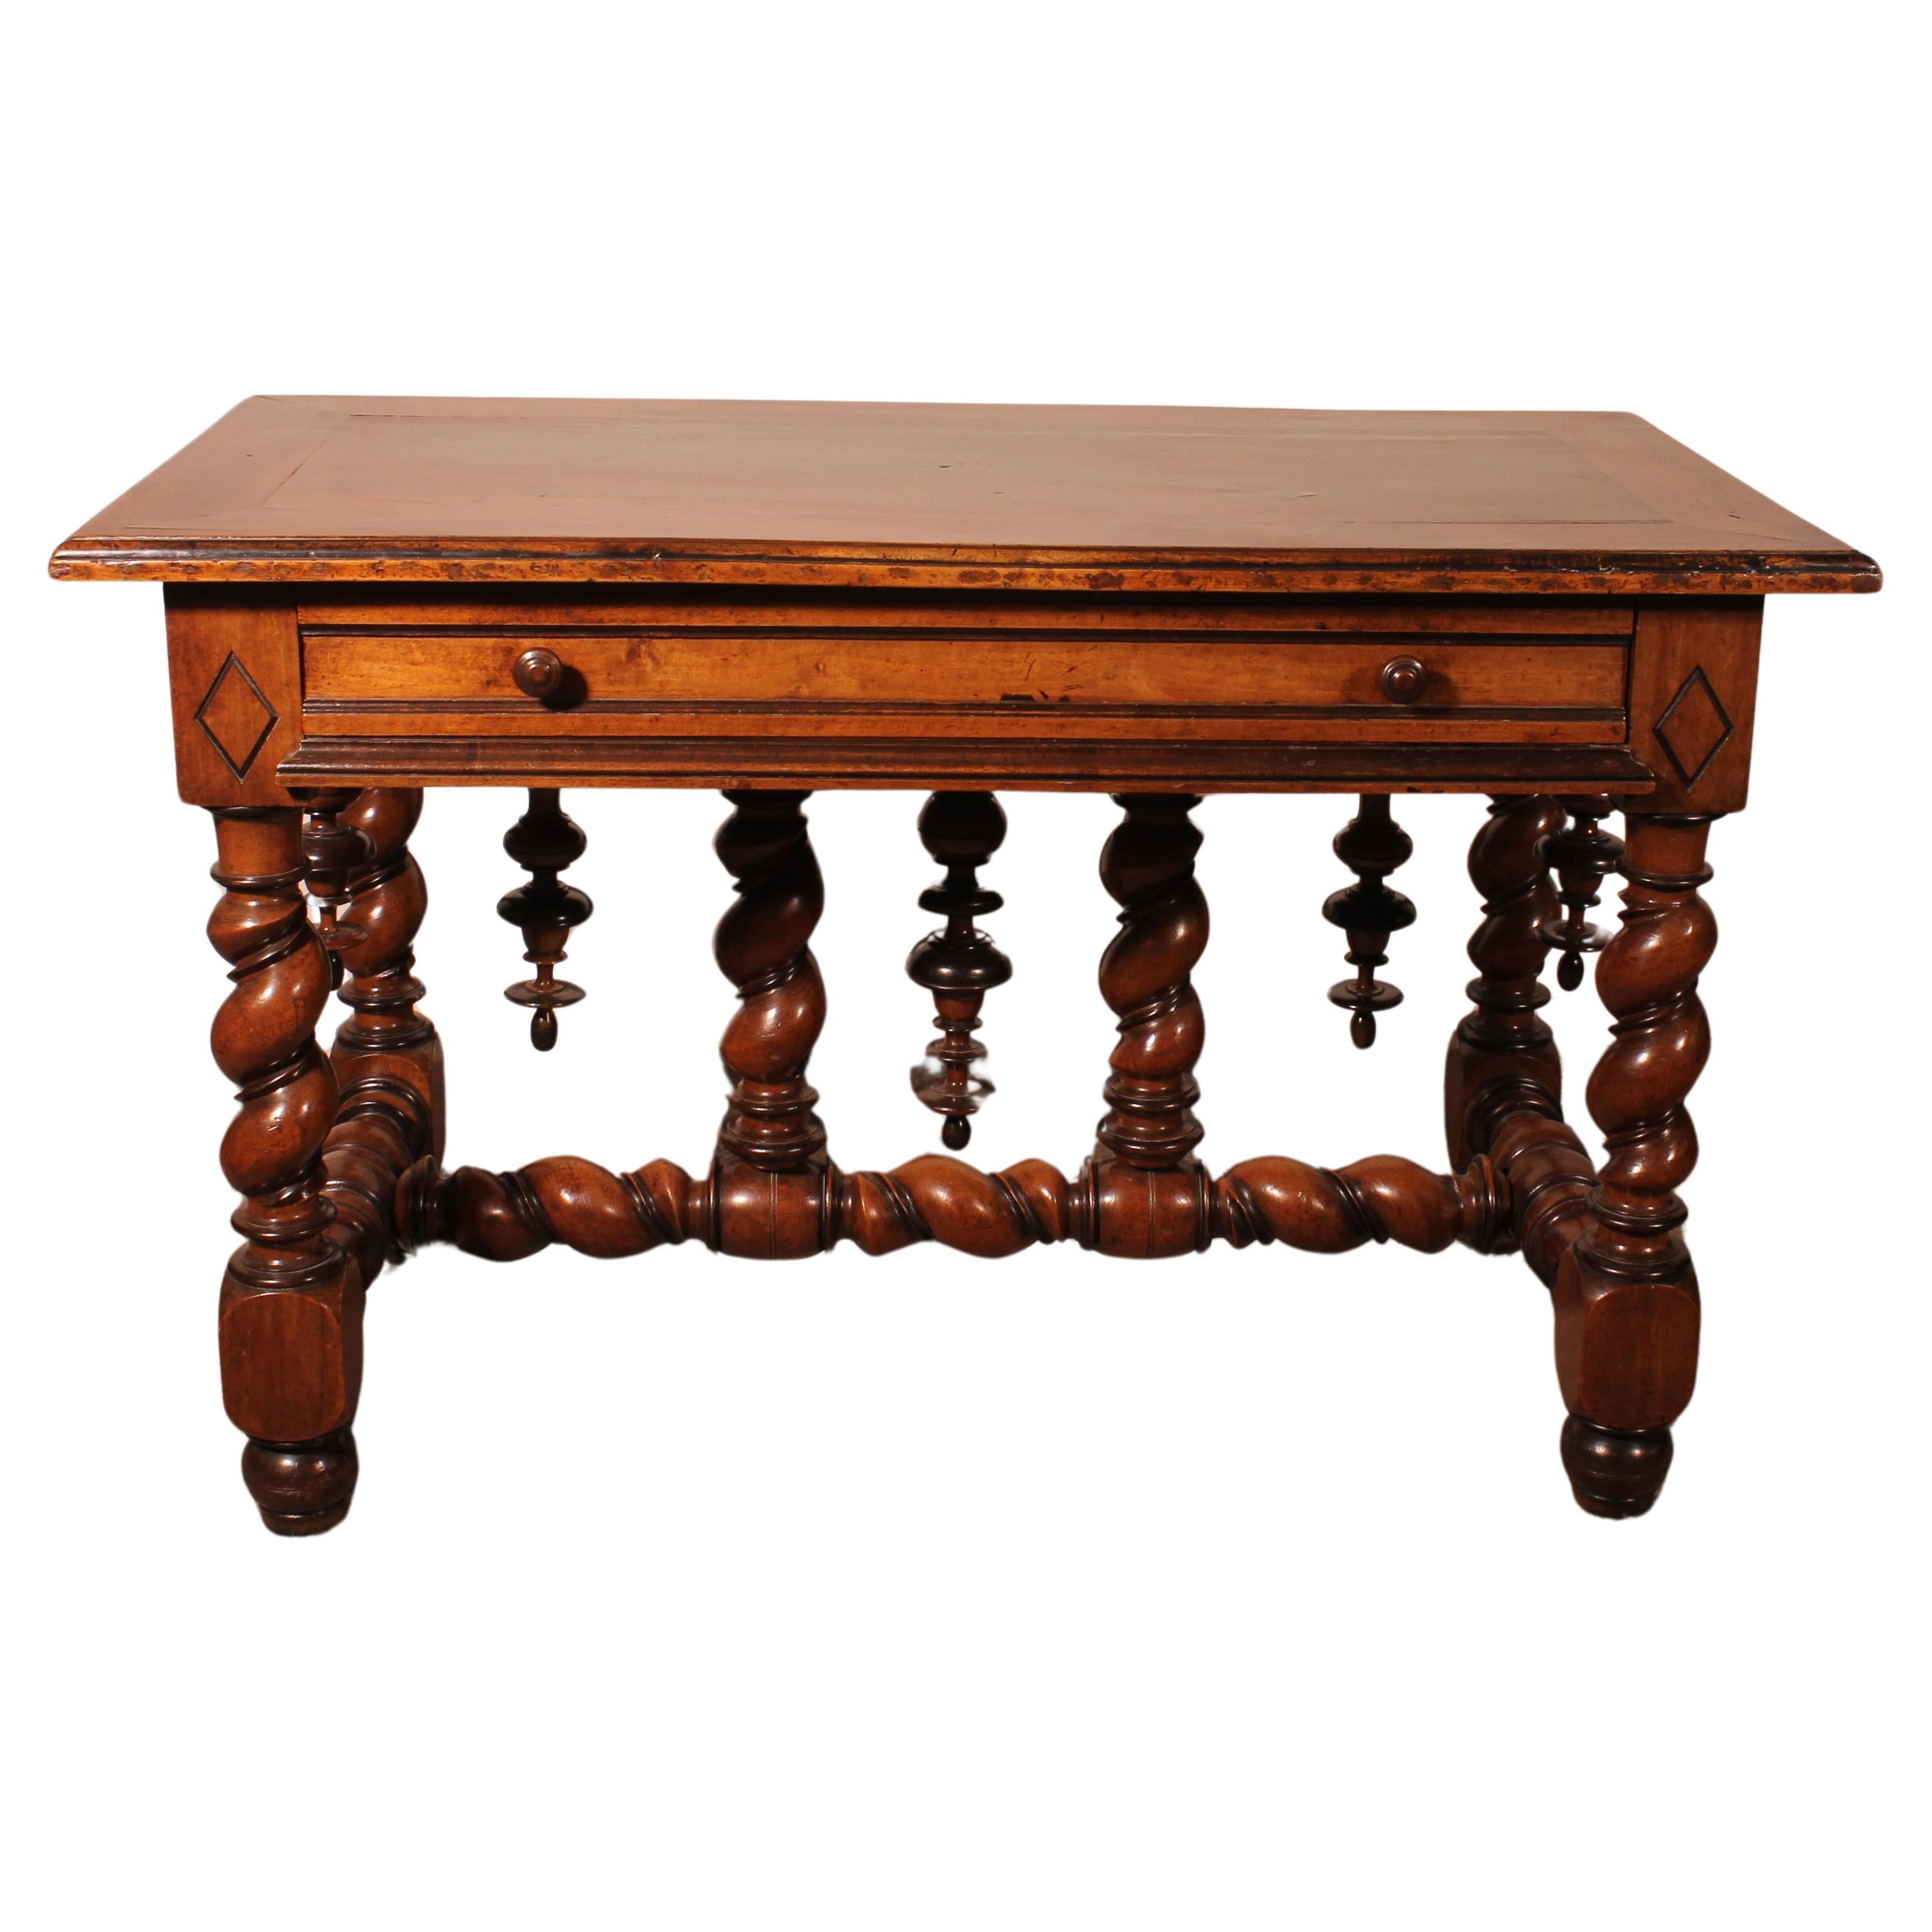 Louis XIII Period Center Table Or Console In Walnut -early 17 Century